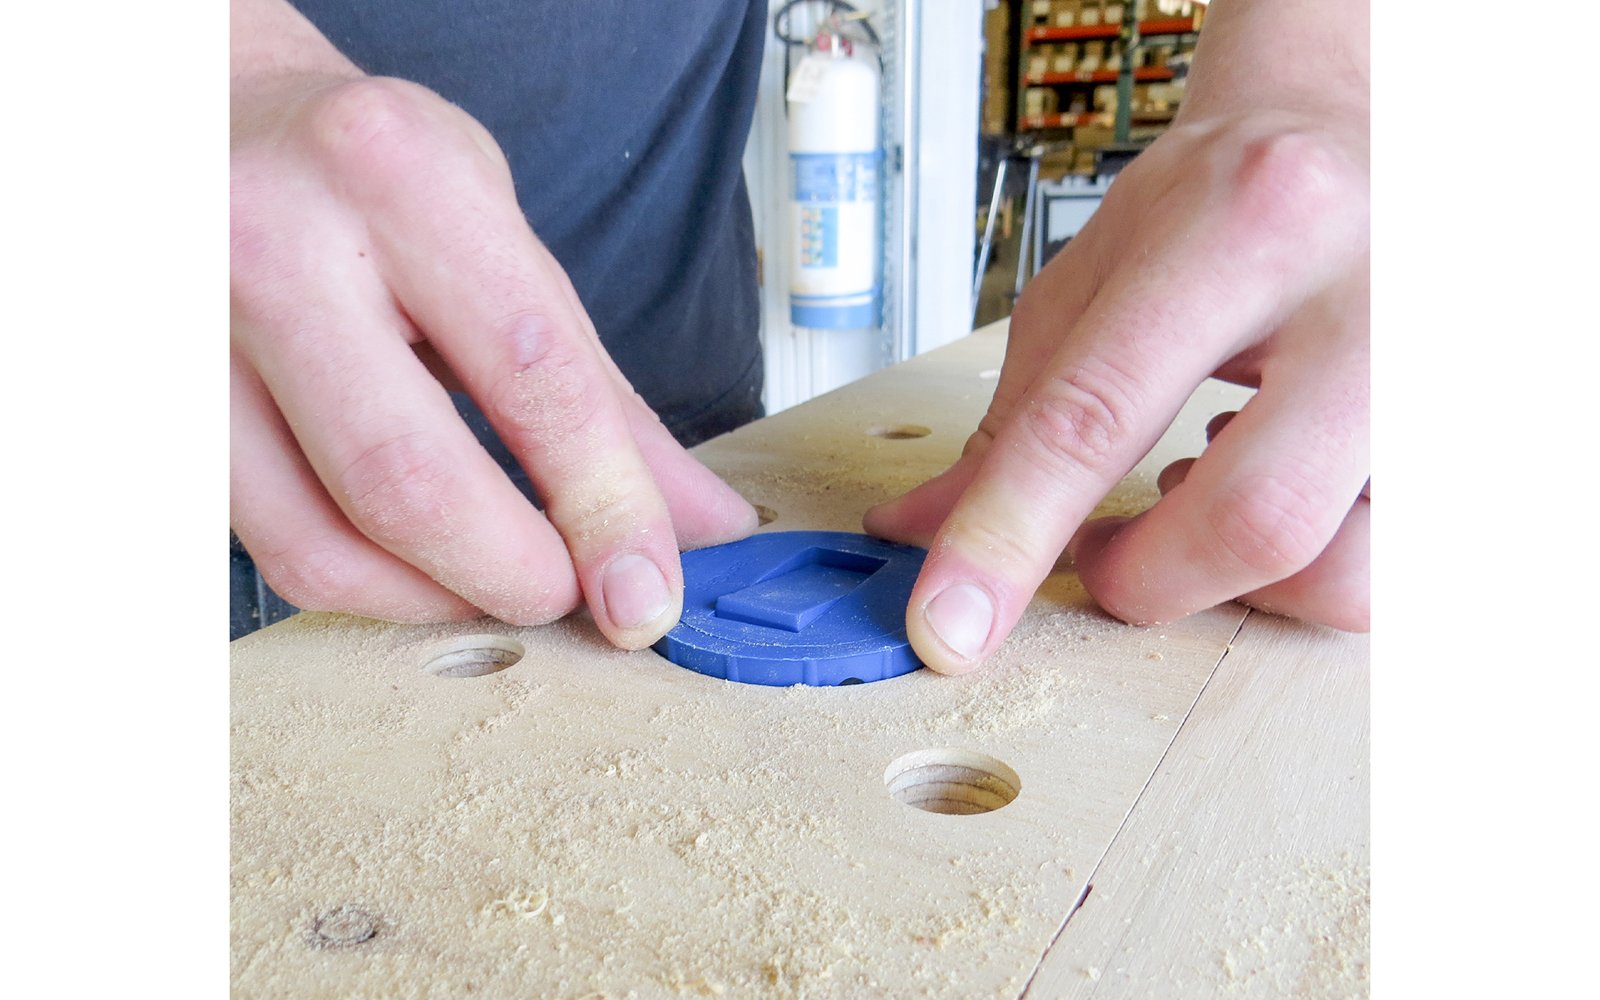 Gives great functionality to your workbench when dogs are needed - 2-1/2" diameter - Model BLUE DOG SINGLE - use a 2-1/2" hole saw to drill out a hole, sand the top edge, & press the Blue Dog down into the hole until flush - height adjustment for any material thickness & the turntable feature allows flexibility - 663807025005